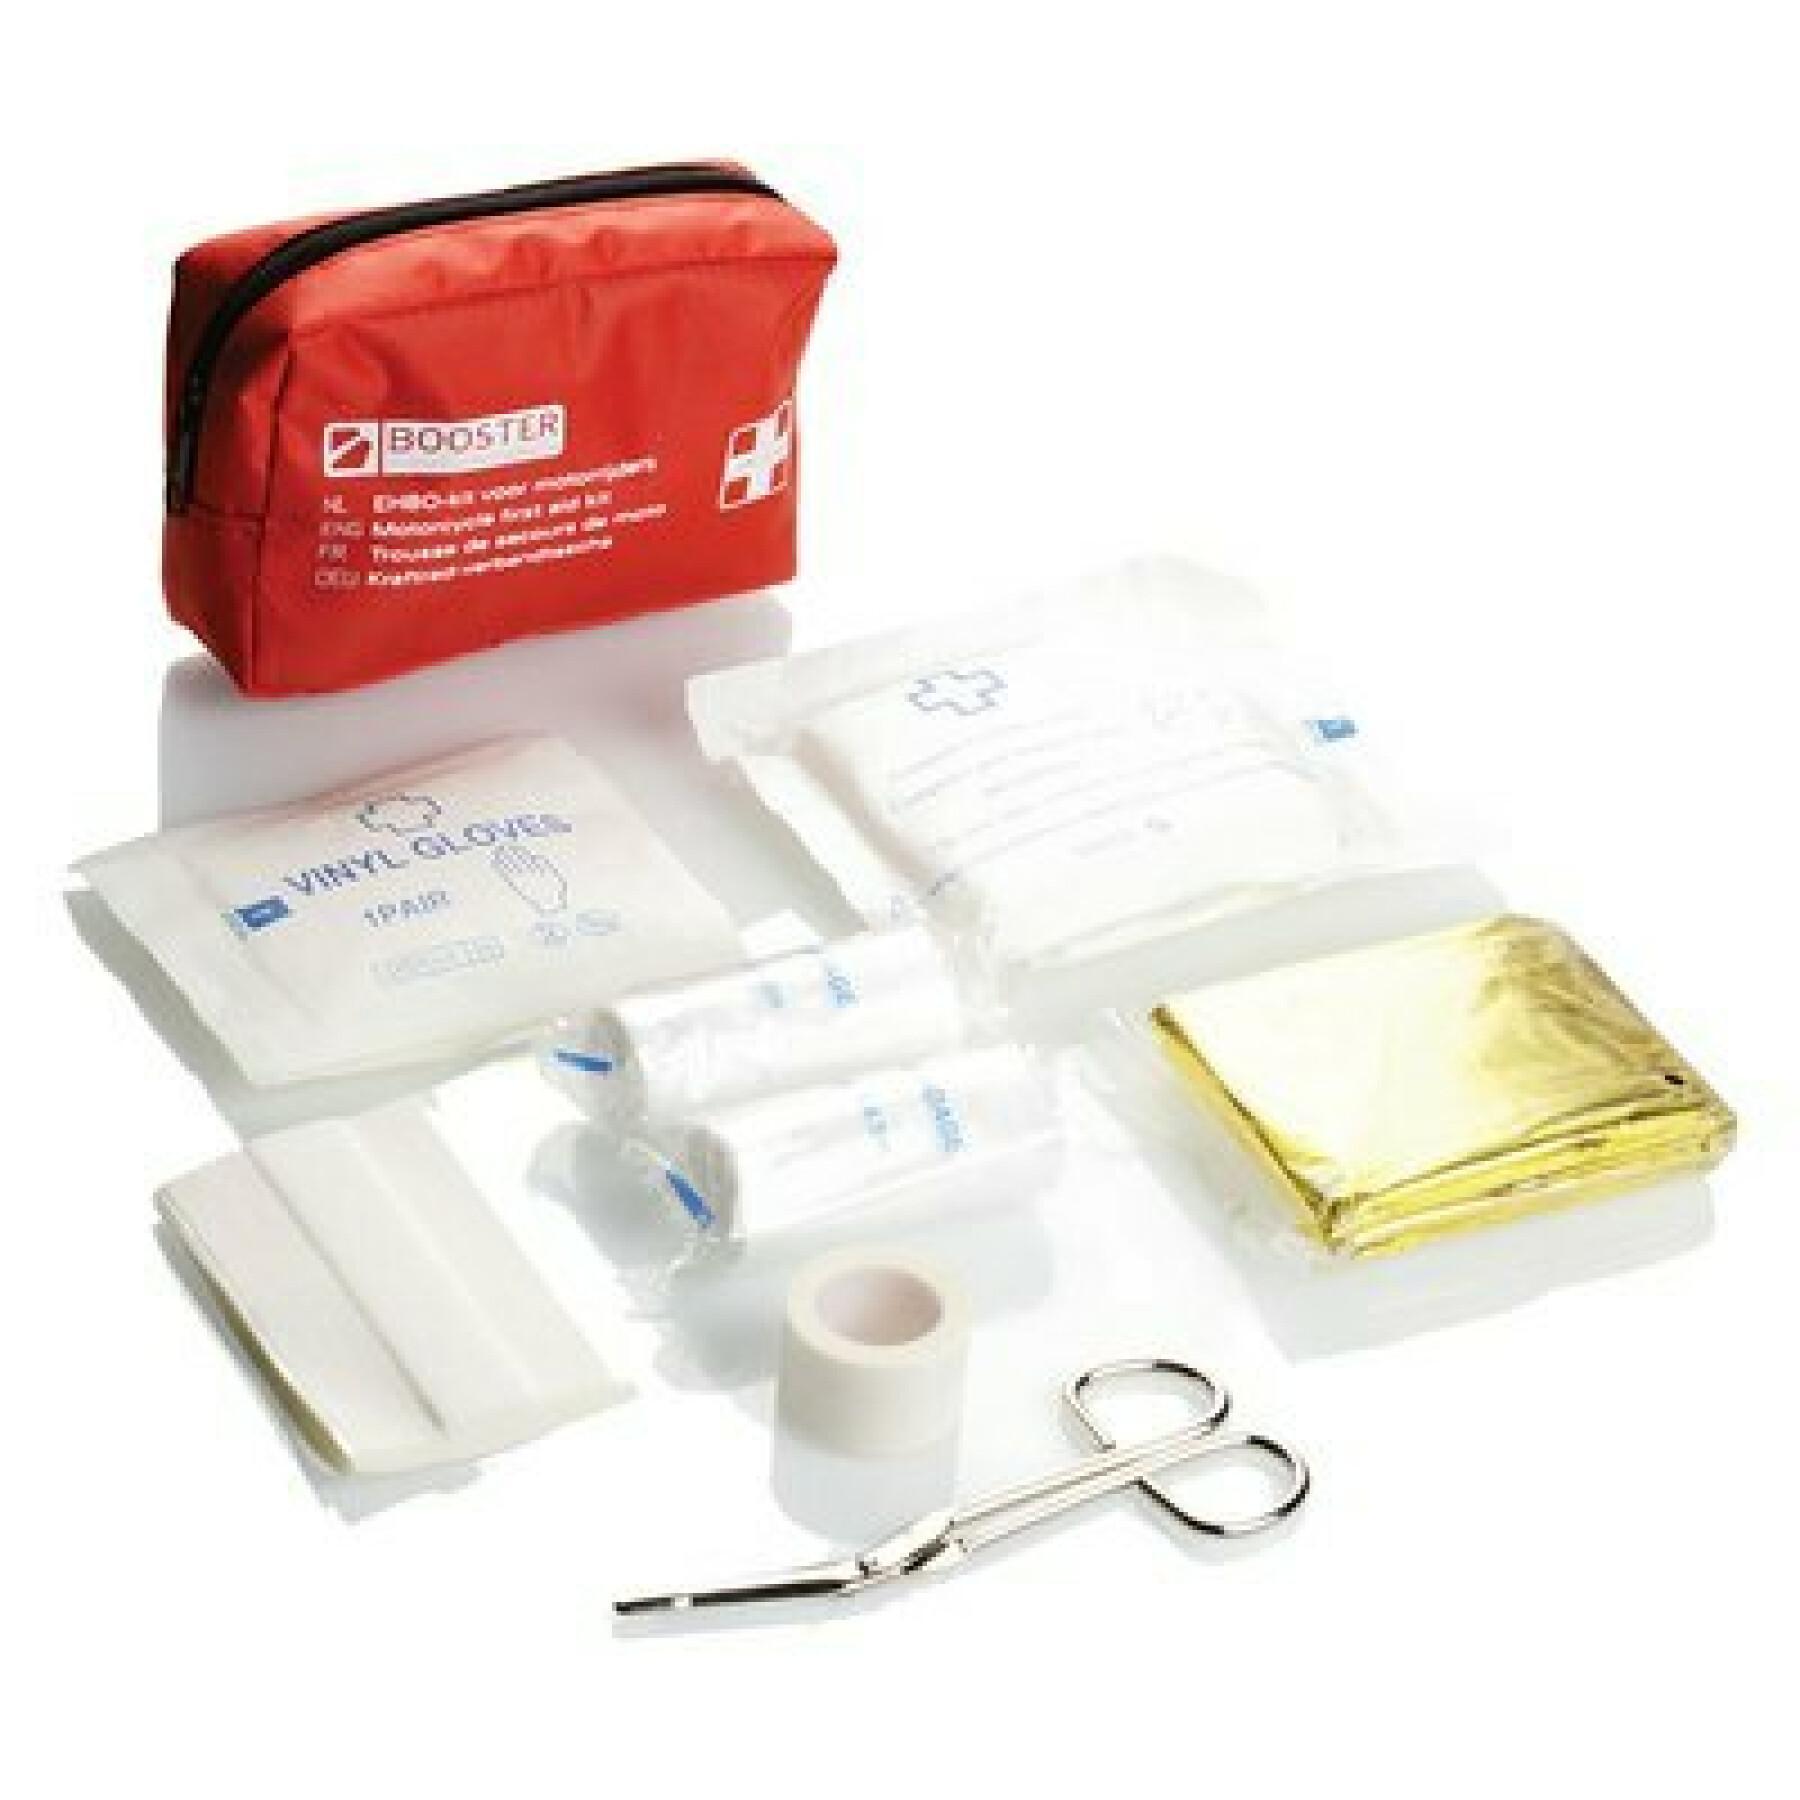 First aid kit Booster